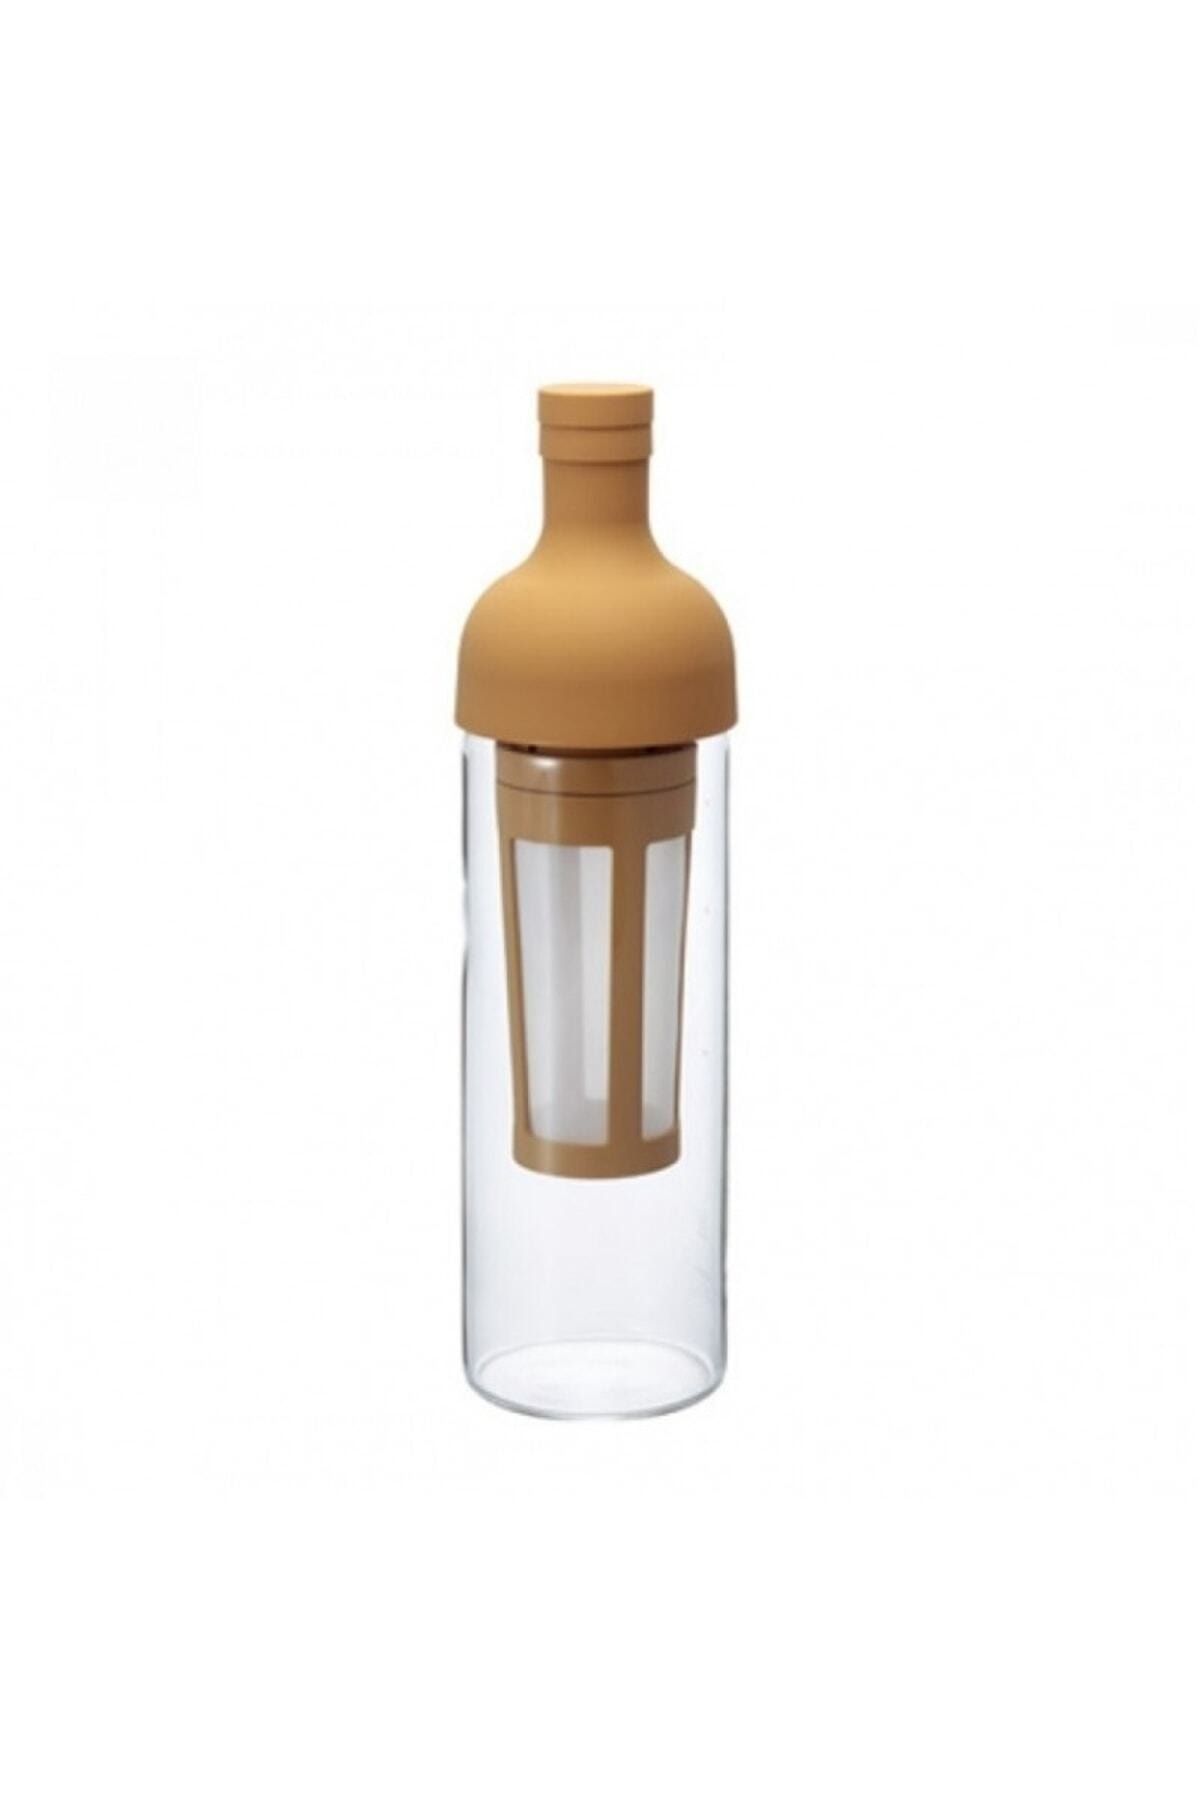 Hario Cold Brew Coffee Filter In Bottle (mocca)